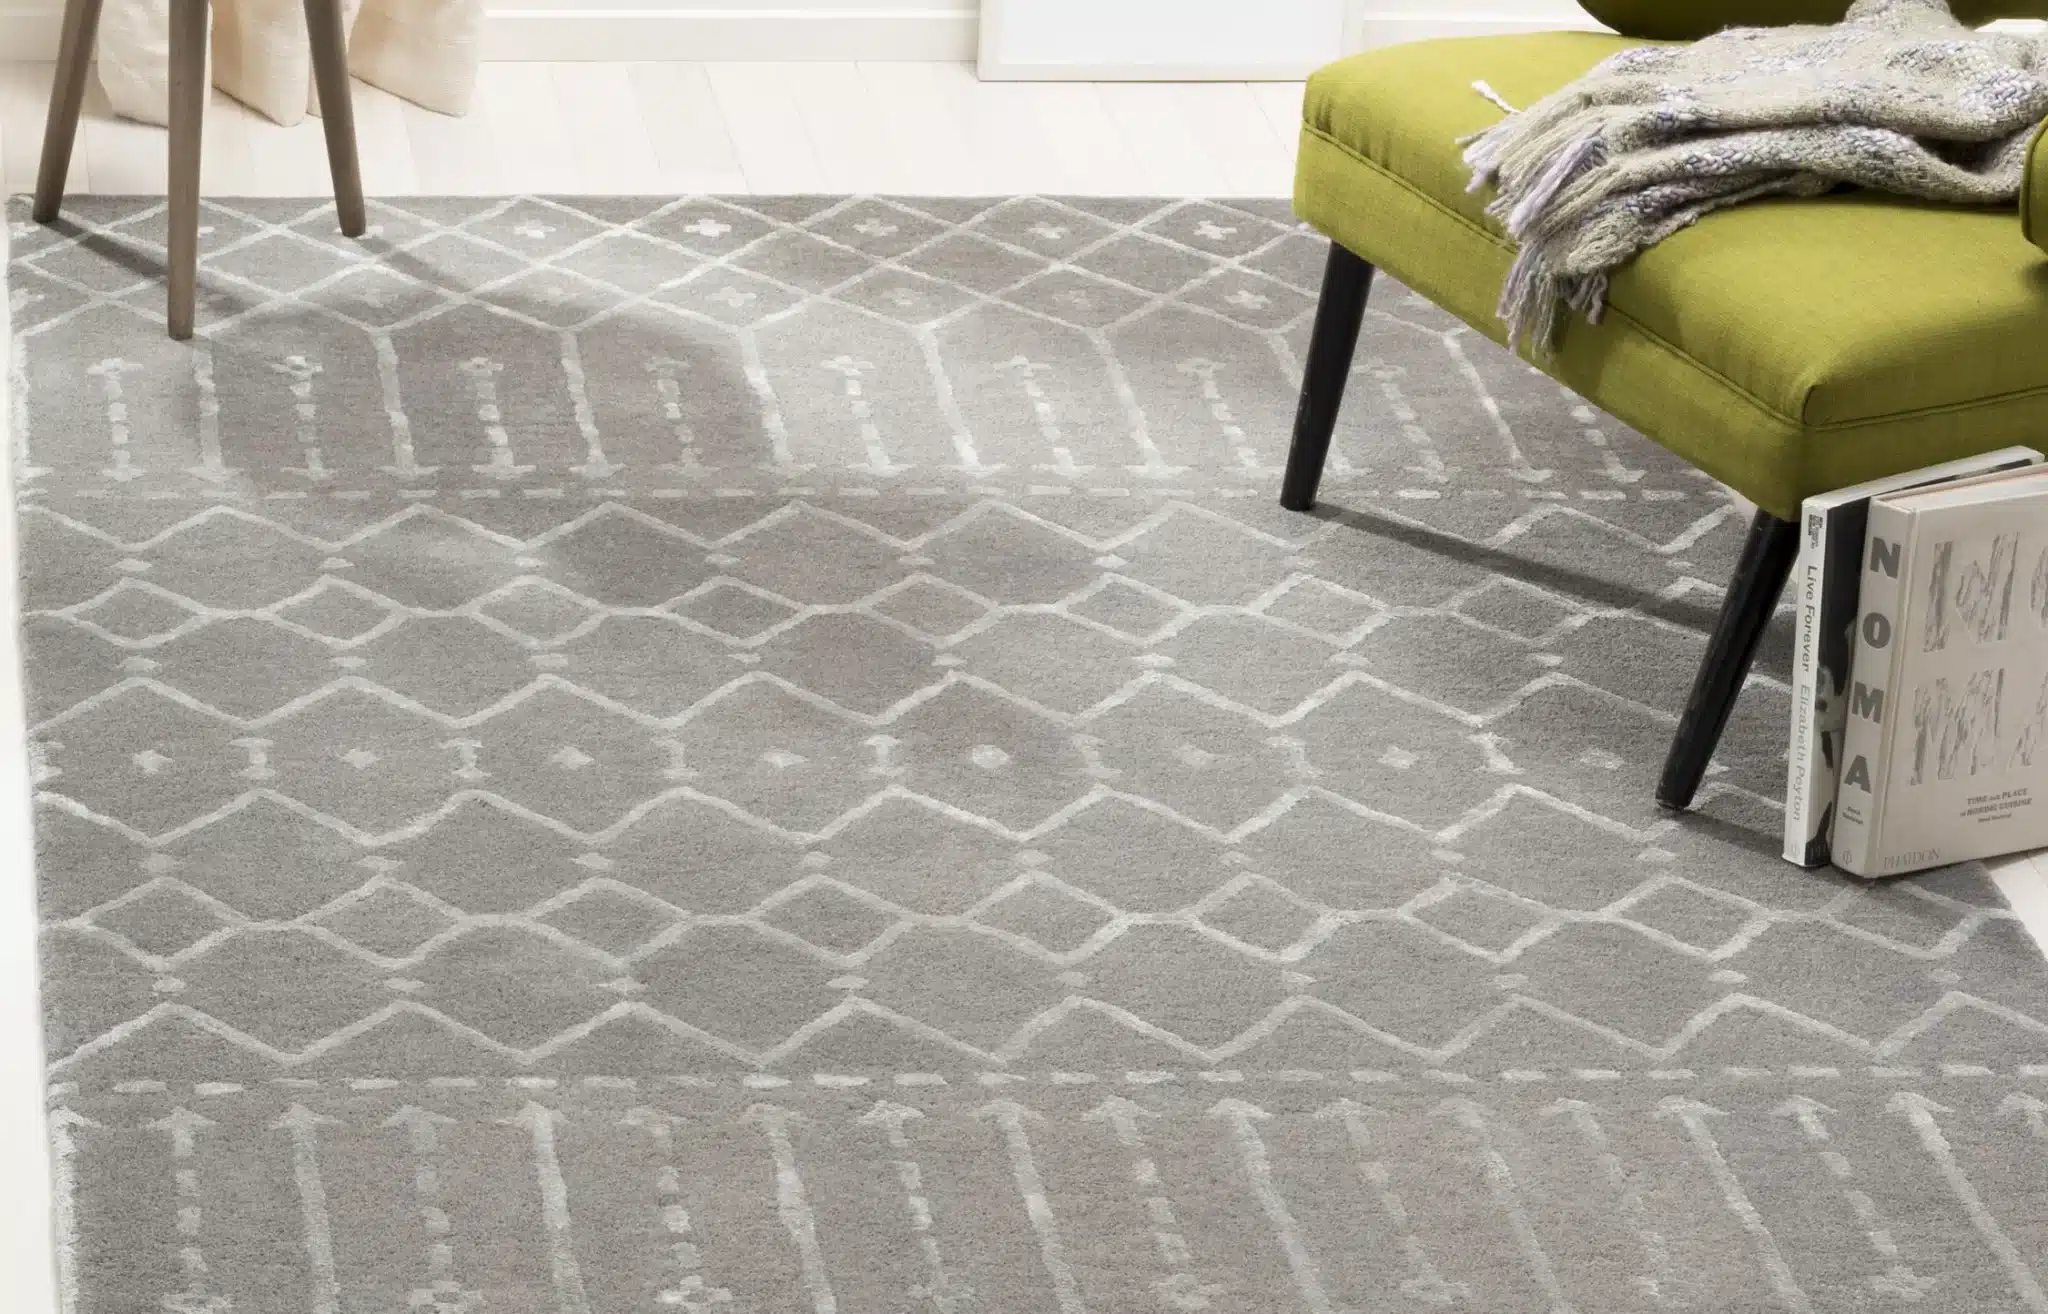 What Are the Top 5 Most Stain-Resistant Rug Materials